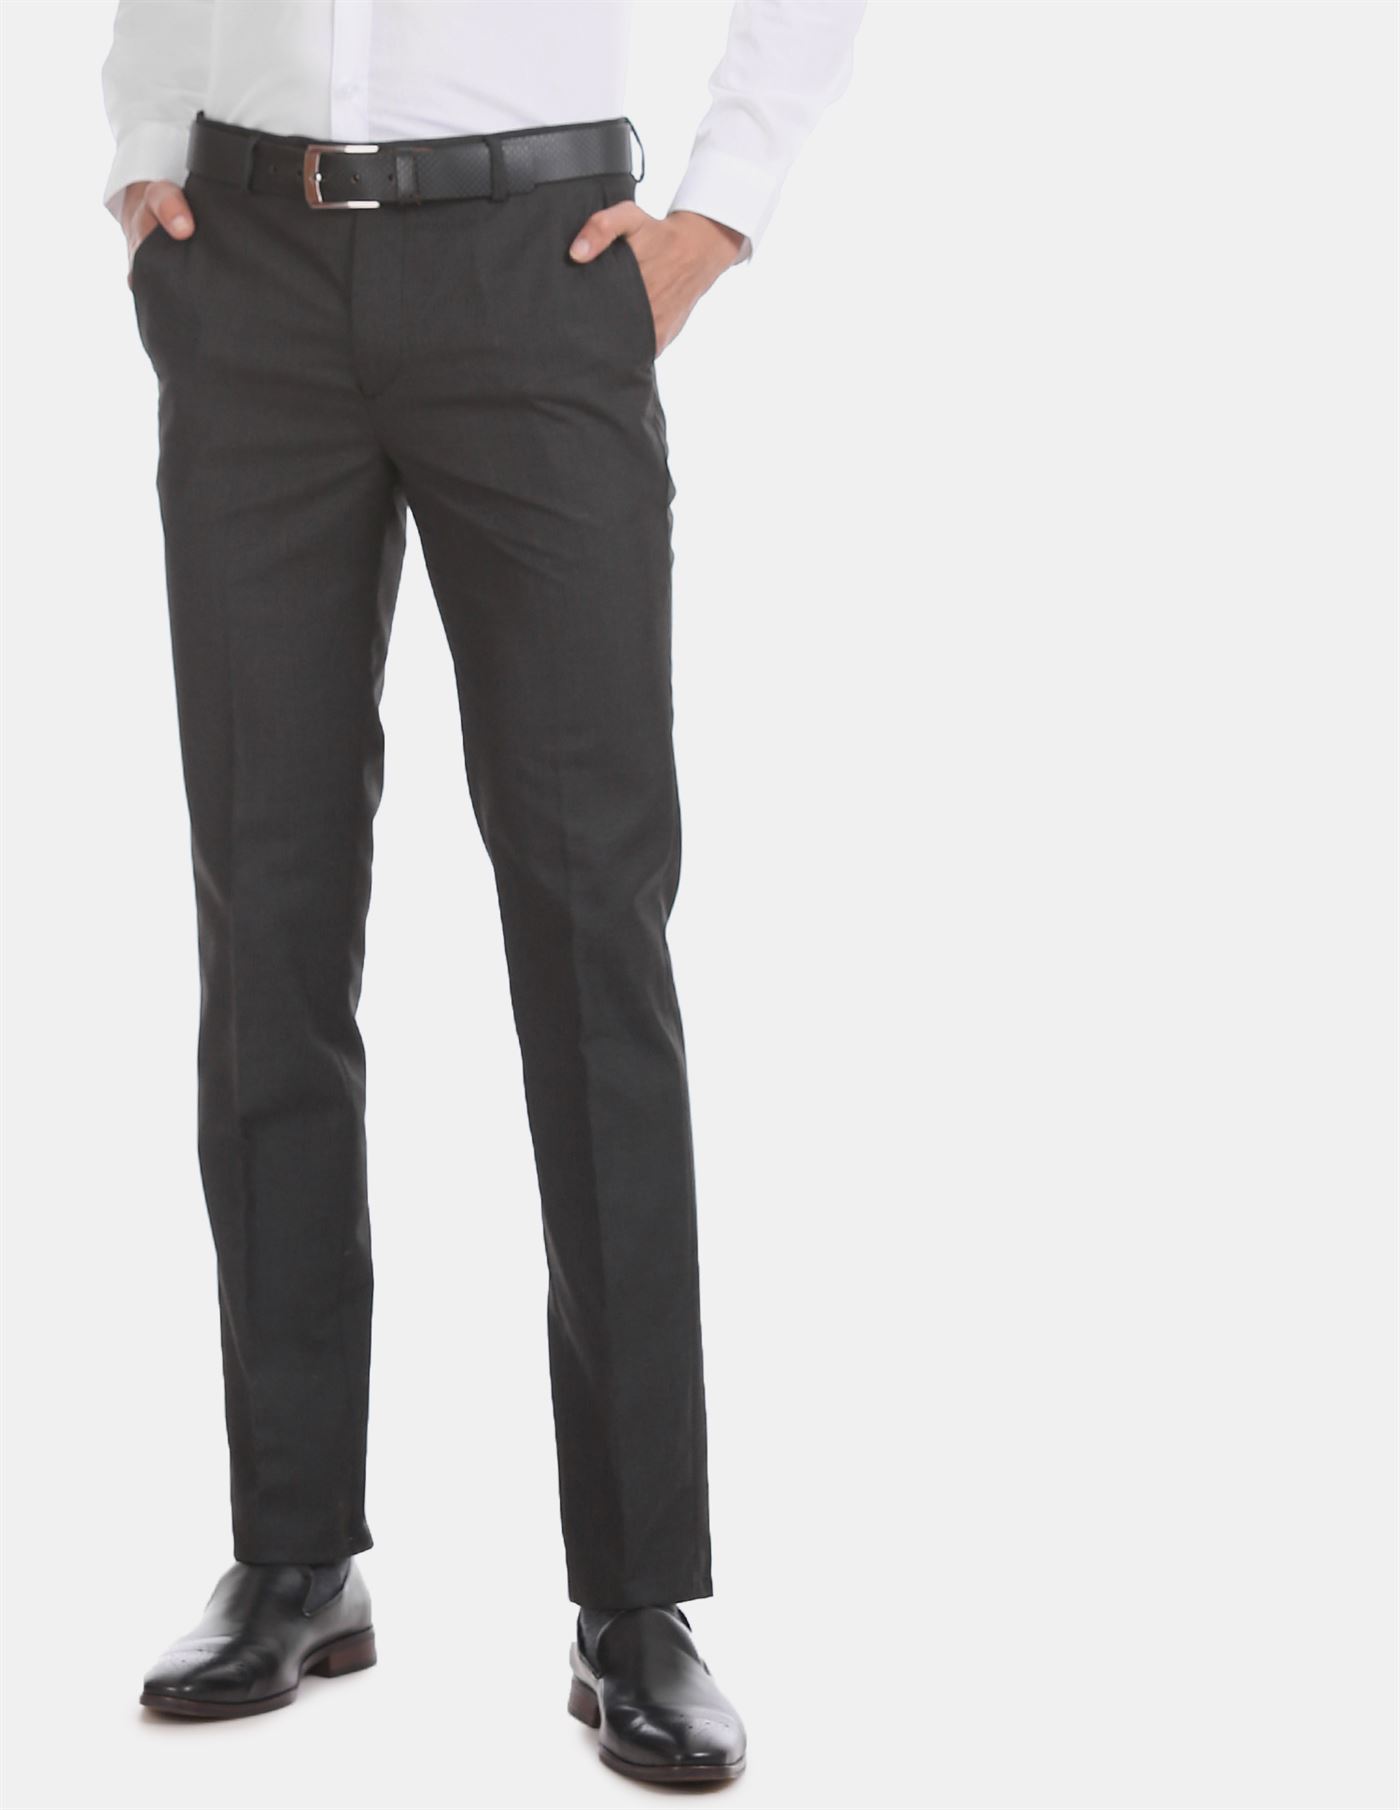 Buy Arrow Mid Rise Heathered Formal Trousers - NNNOW.com